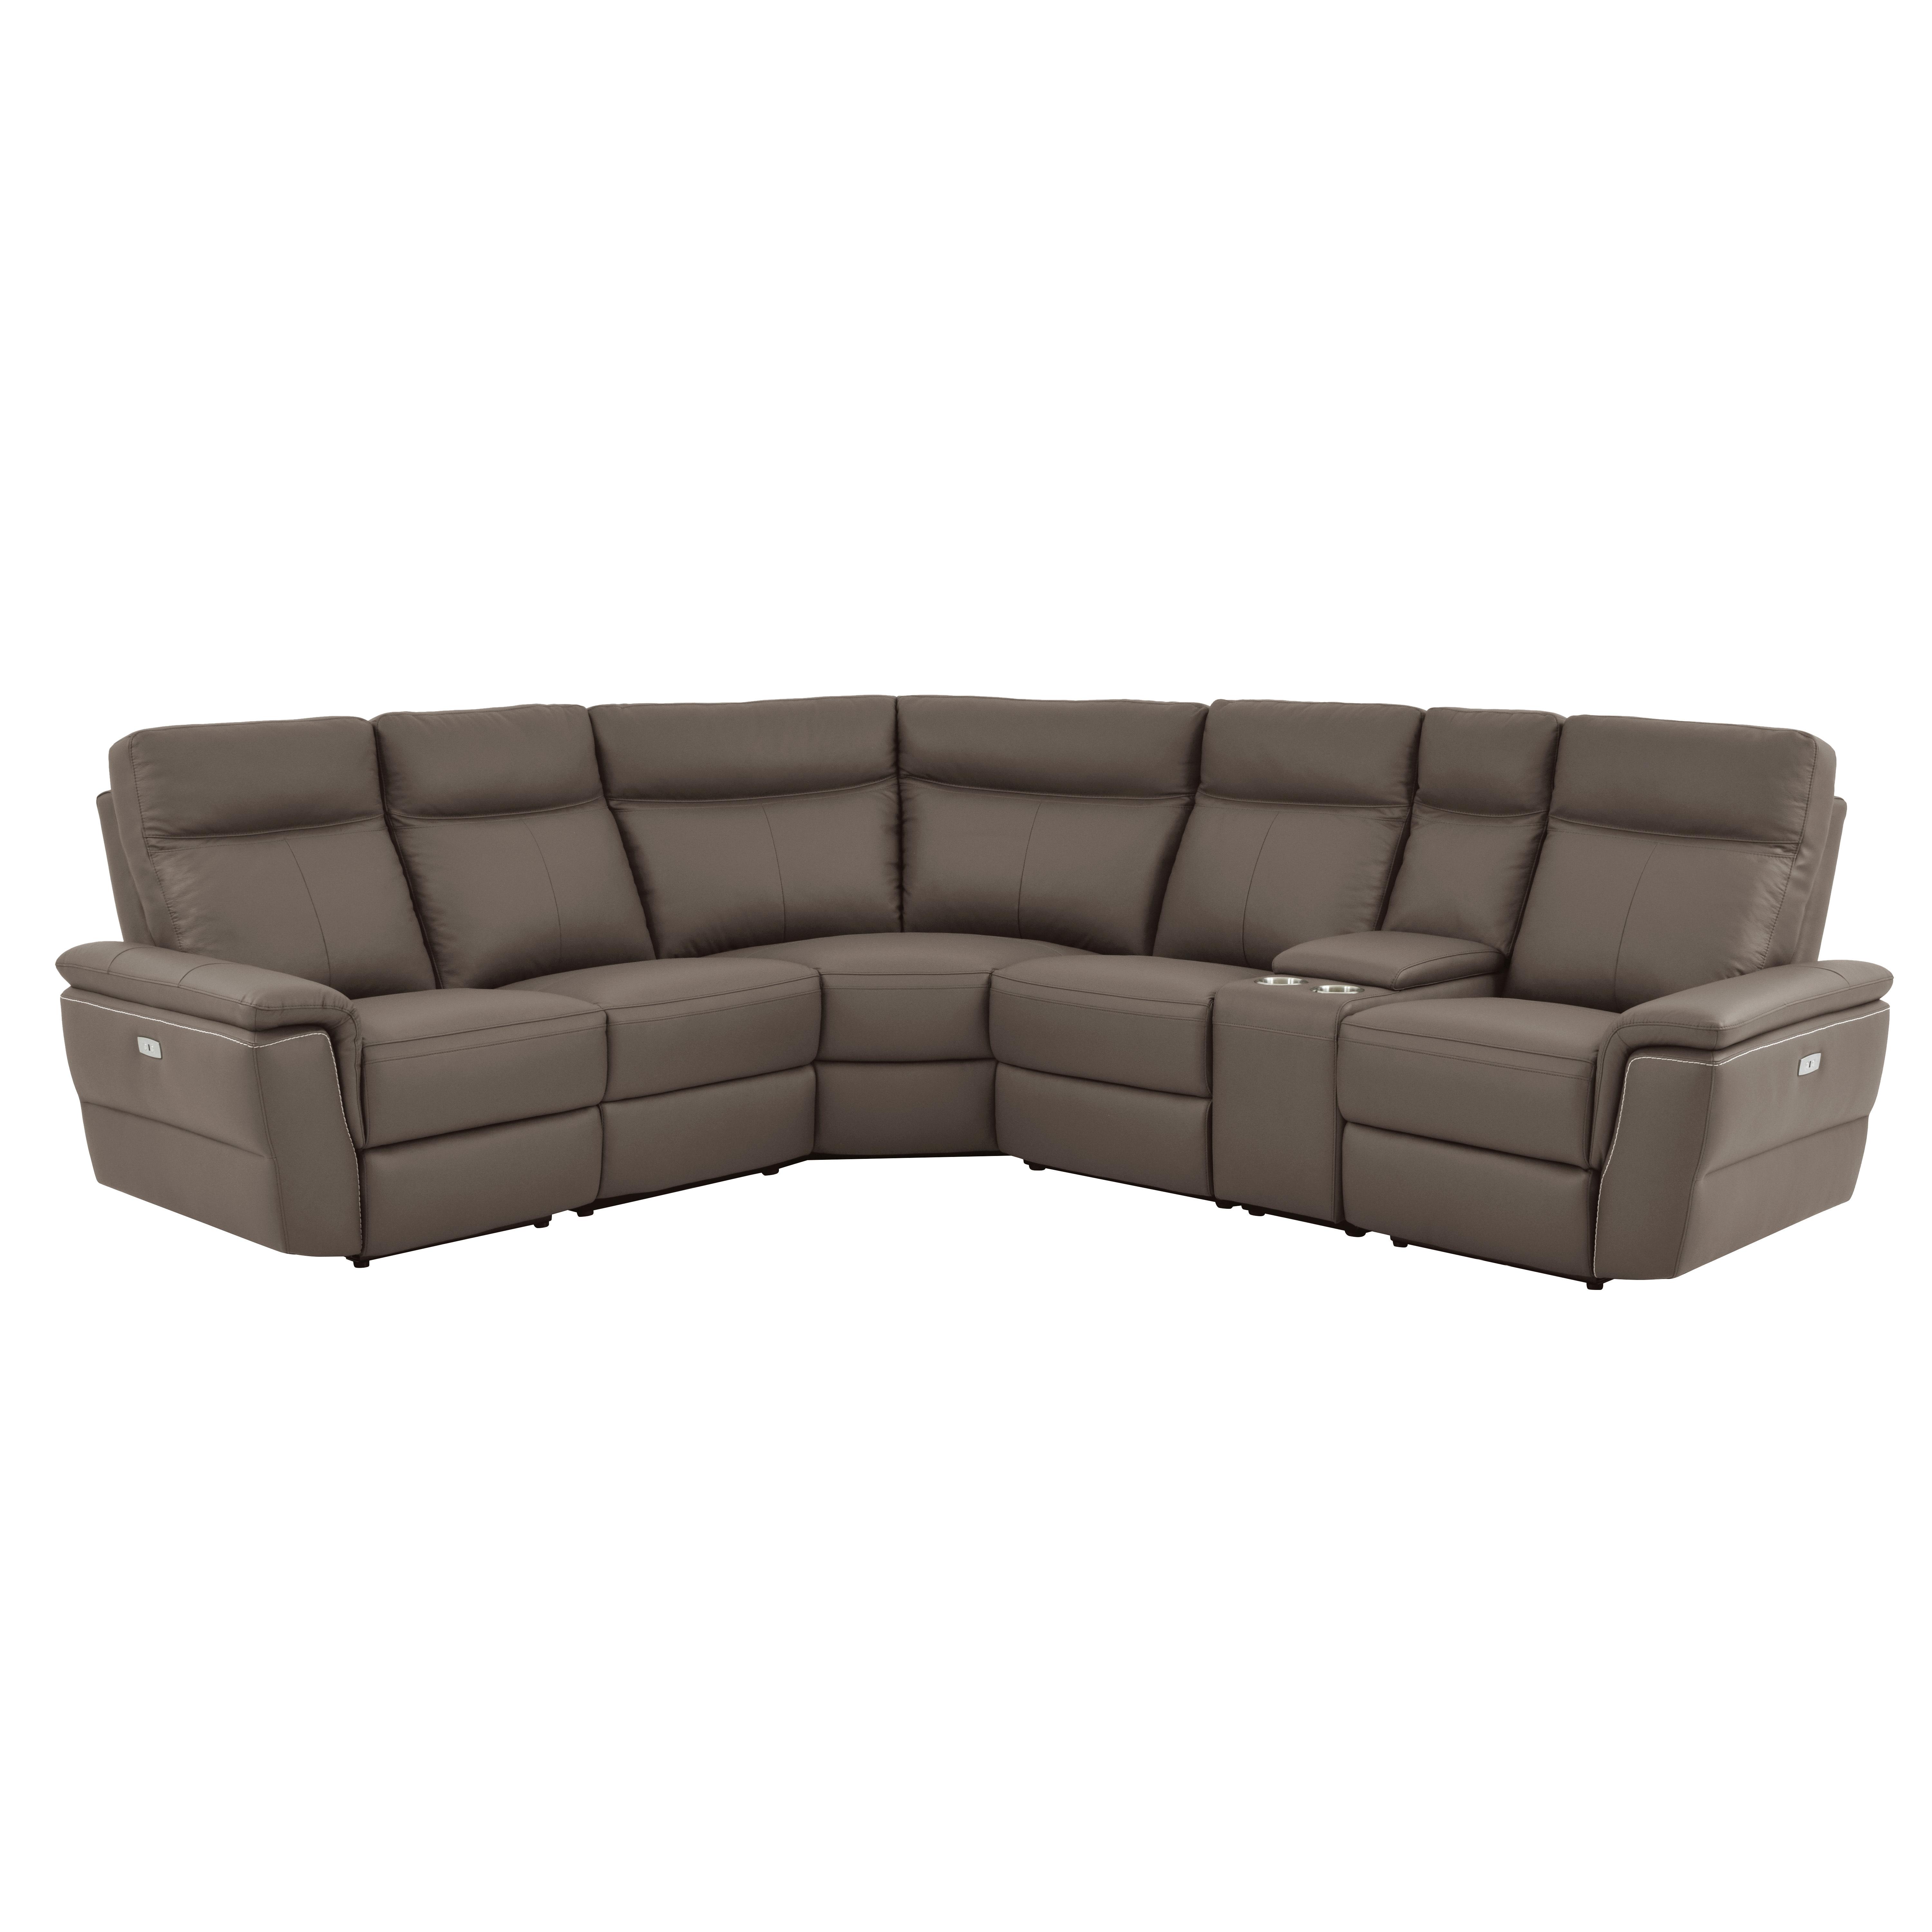 

    
Contemporary Raisin Leather 6-Piece Power Reclining Sectional Homelegance 8308*6C1PW Olympia
